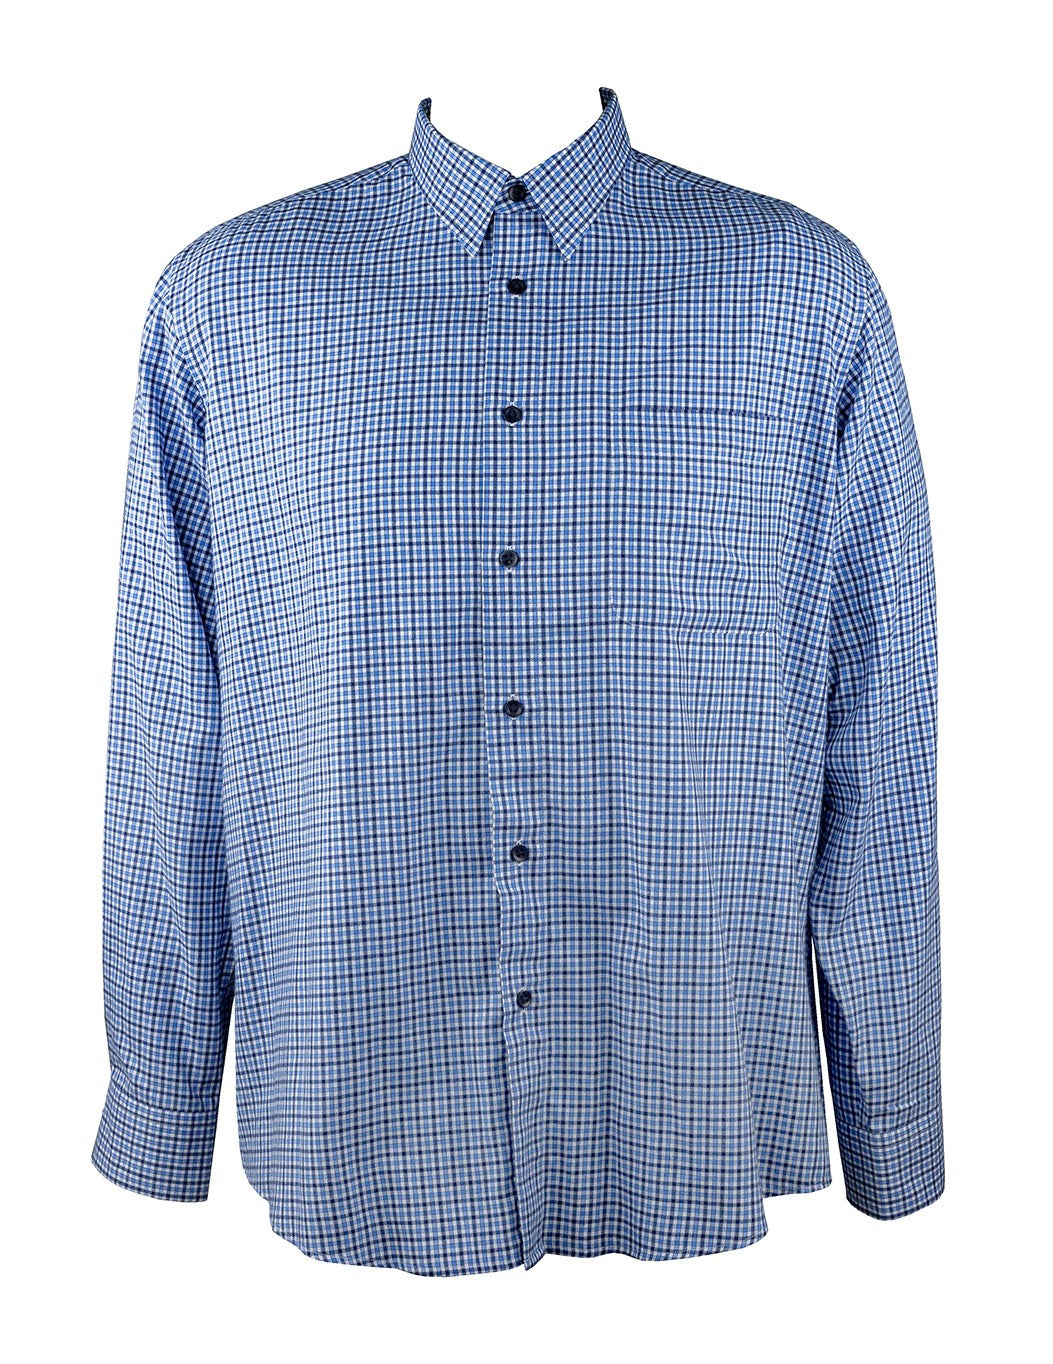 Country Look Blue/Navy Check Long Sleeve Shirt